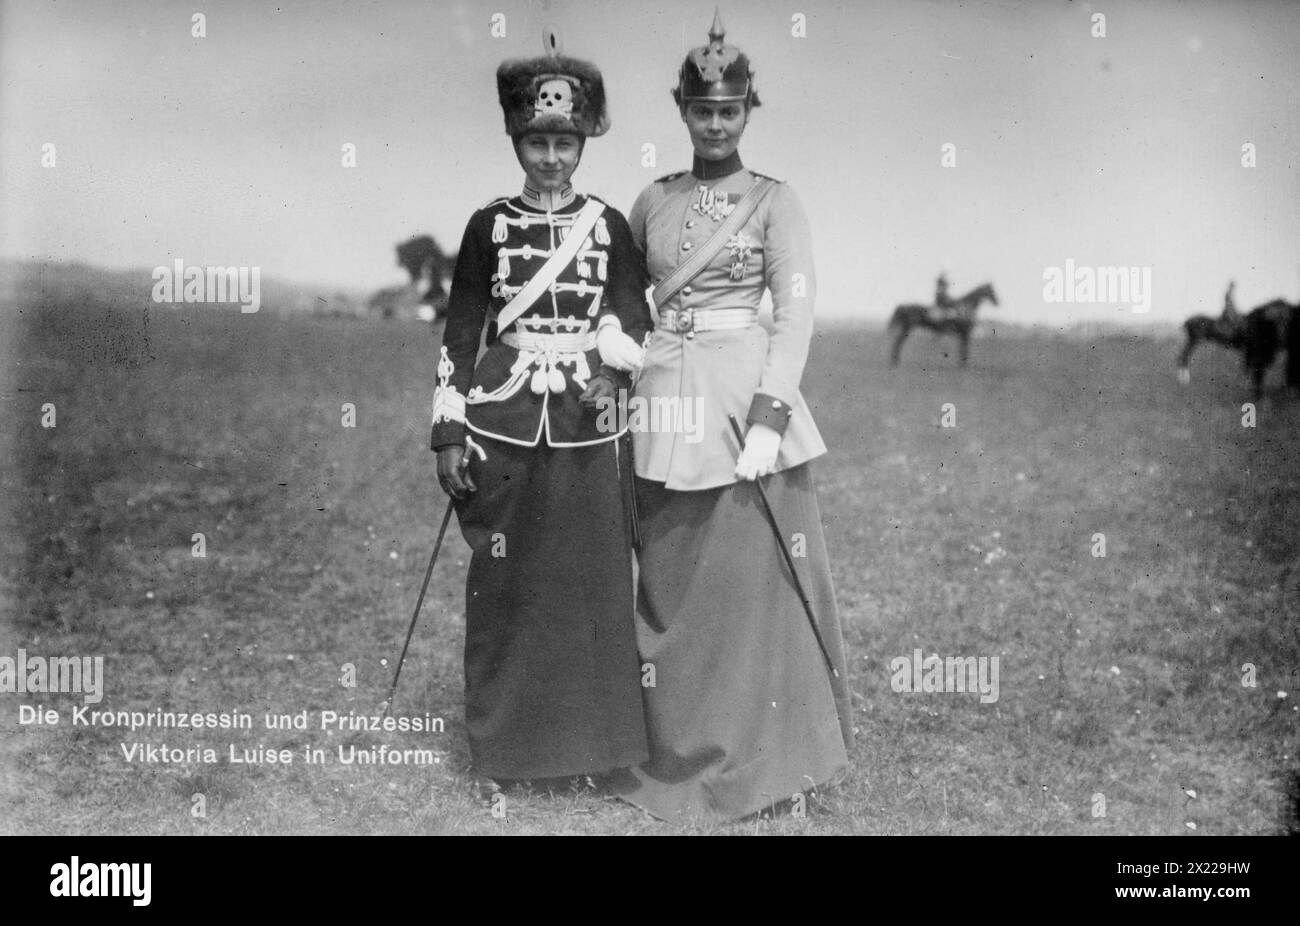 Princess Viktoria Luise and Crown Princess of Germany, between c1910 and c1915. Shows Crown Princess Cecilie Auguste Marie of Mecklenburg-Schwerin (1886-1954), wife of German Crown Prince William (left) wearing her Dragoon regiment uniform and Victoria Louise of Prussia (the Duchess of Brunswick) in the uniform of her personal Hussar Regiment. Stock Photo